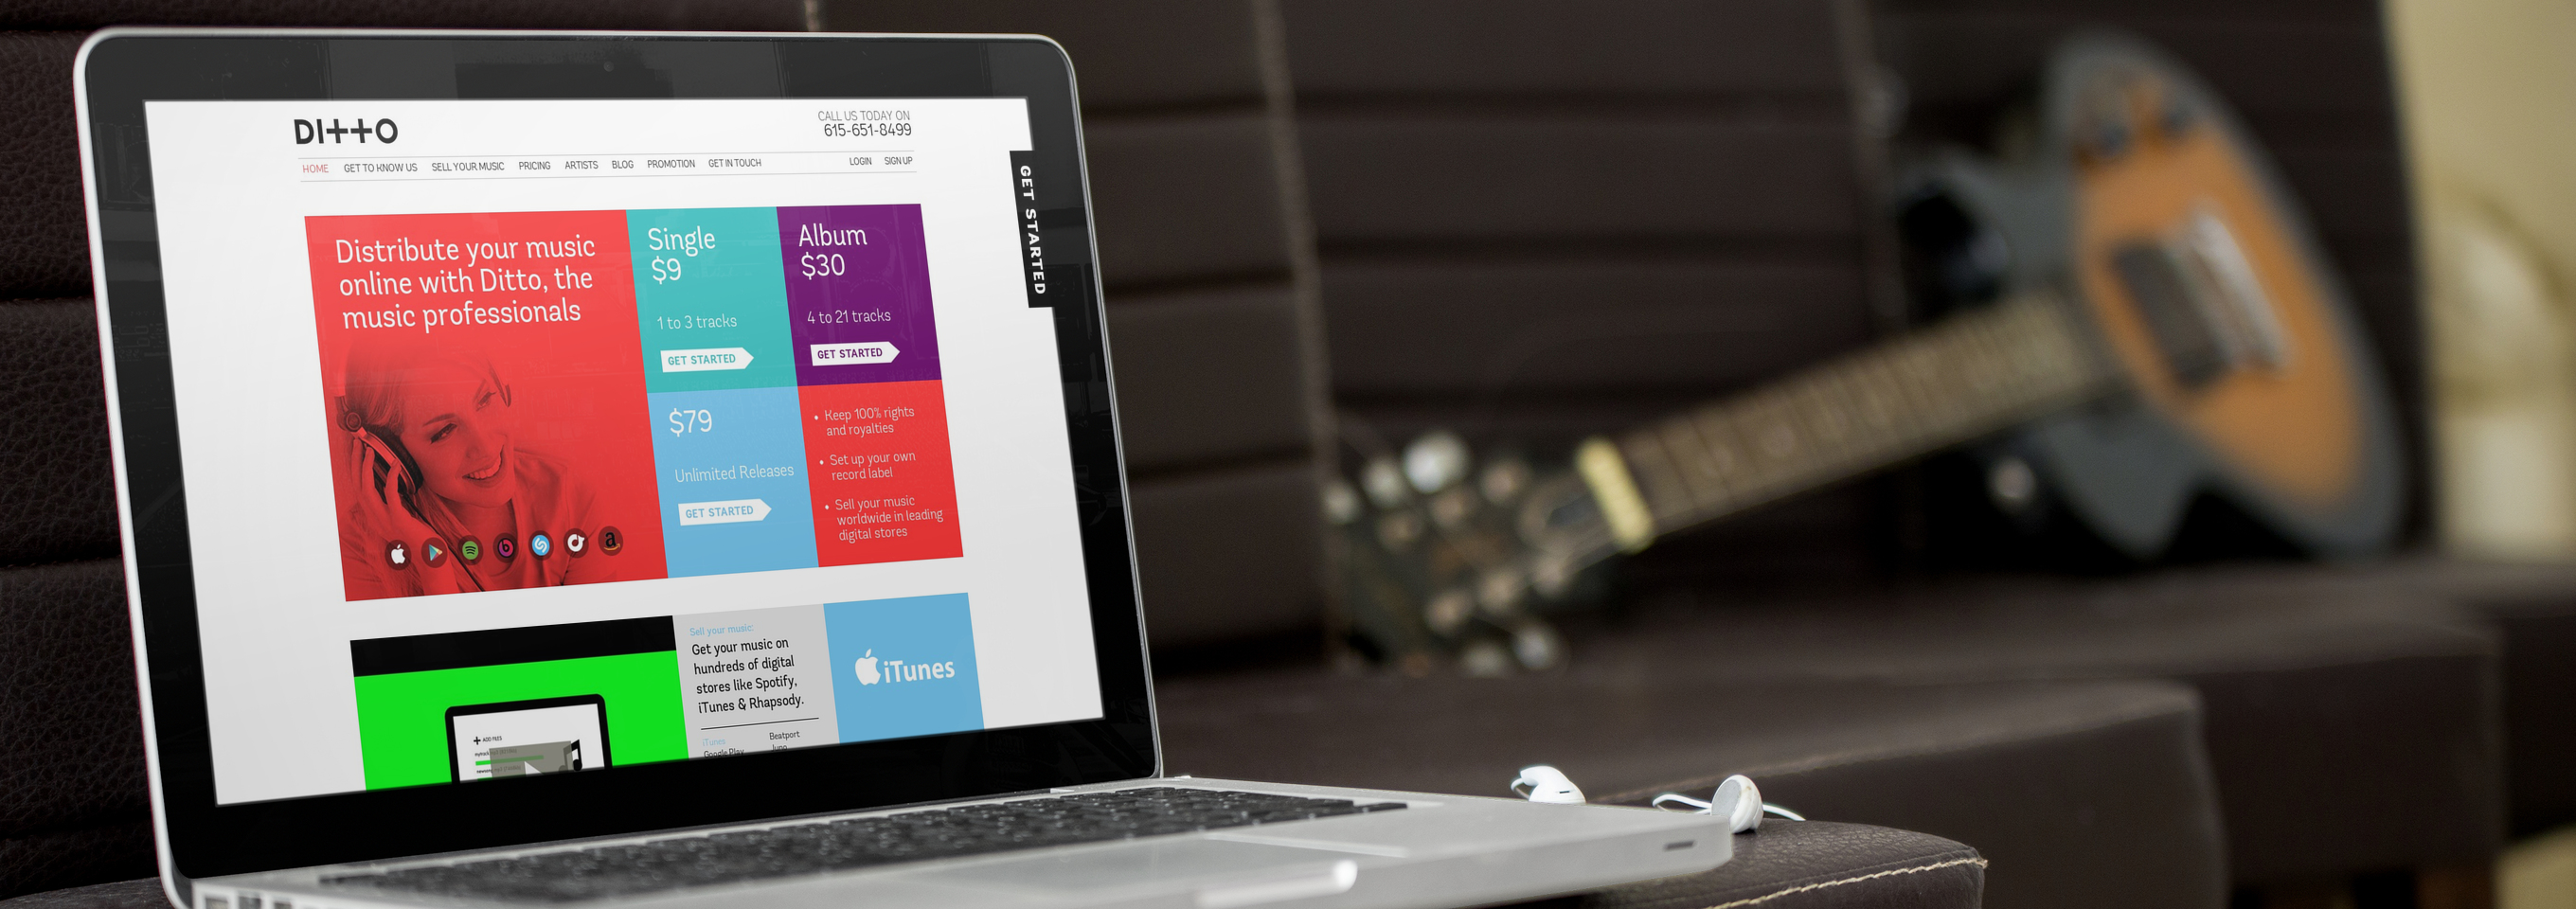 Ditto Music expands in the US with new Los Angeles office - Music Business  Worldwide